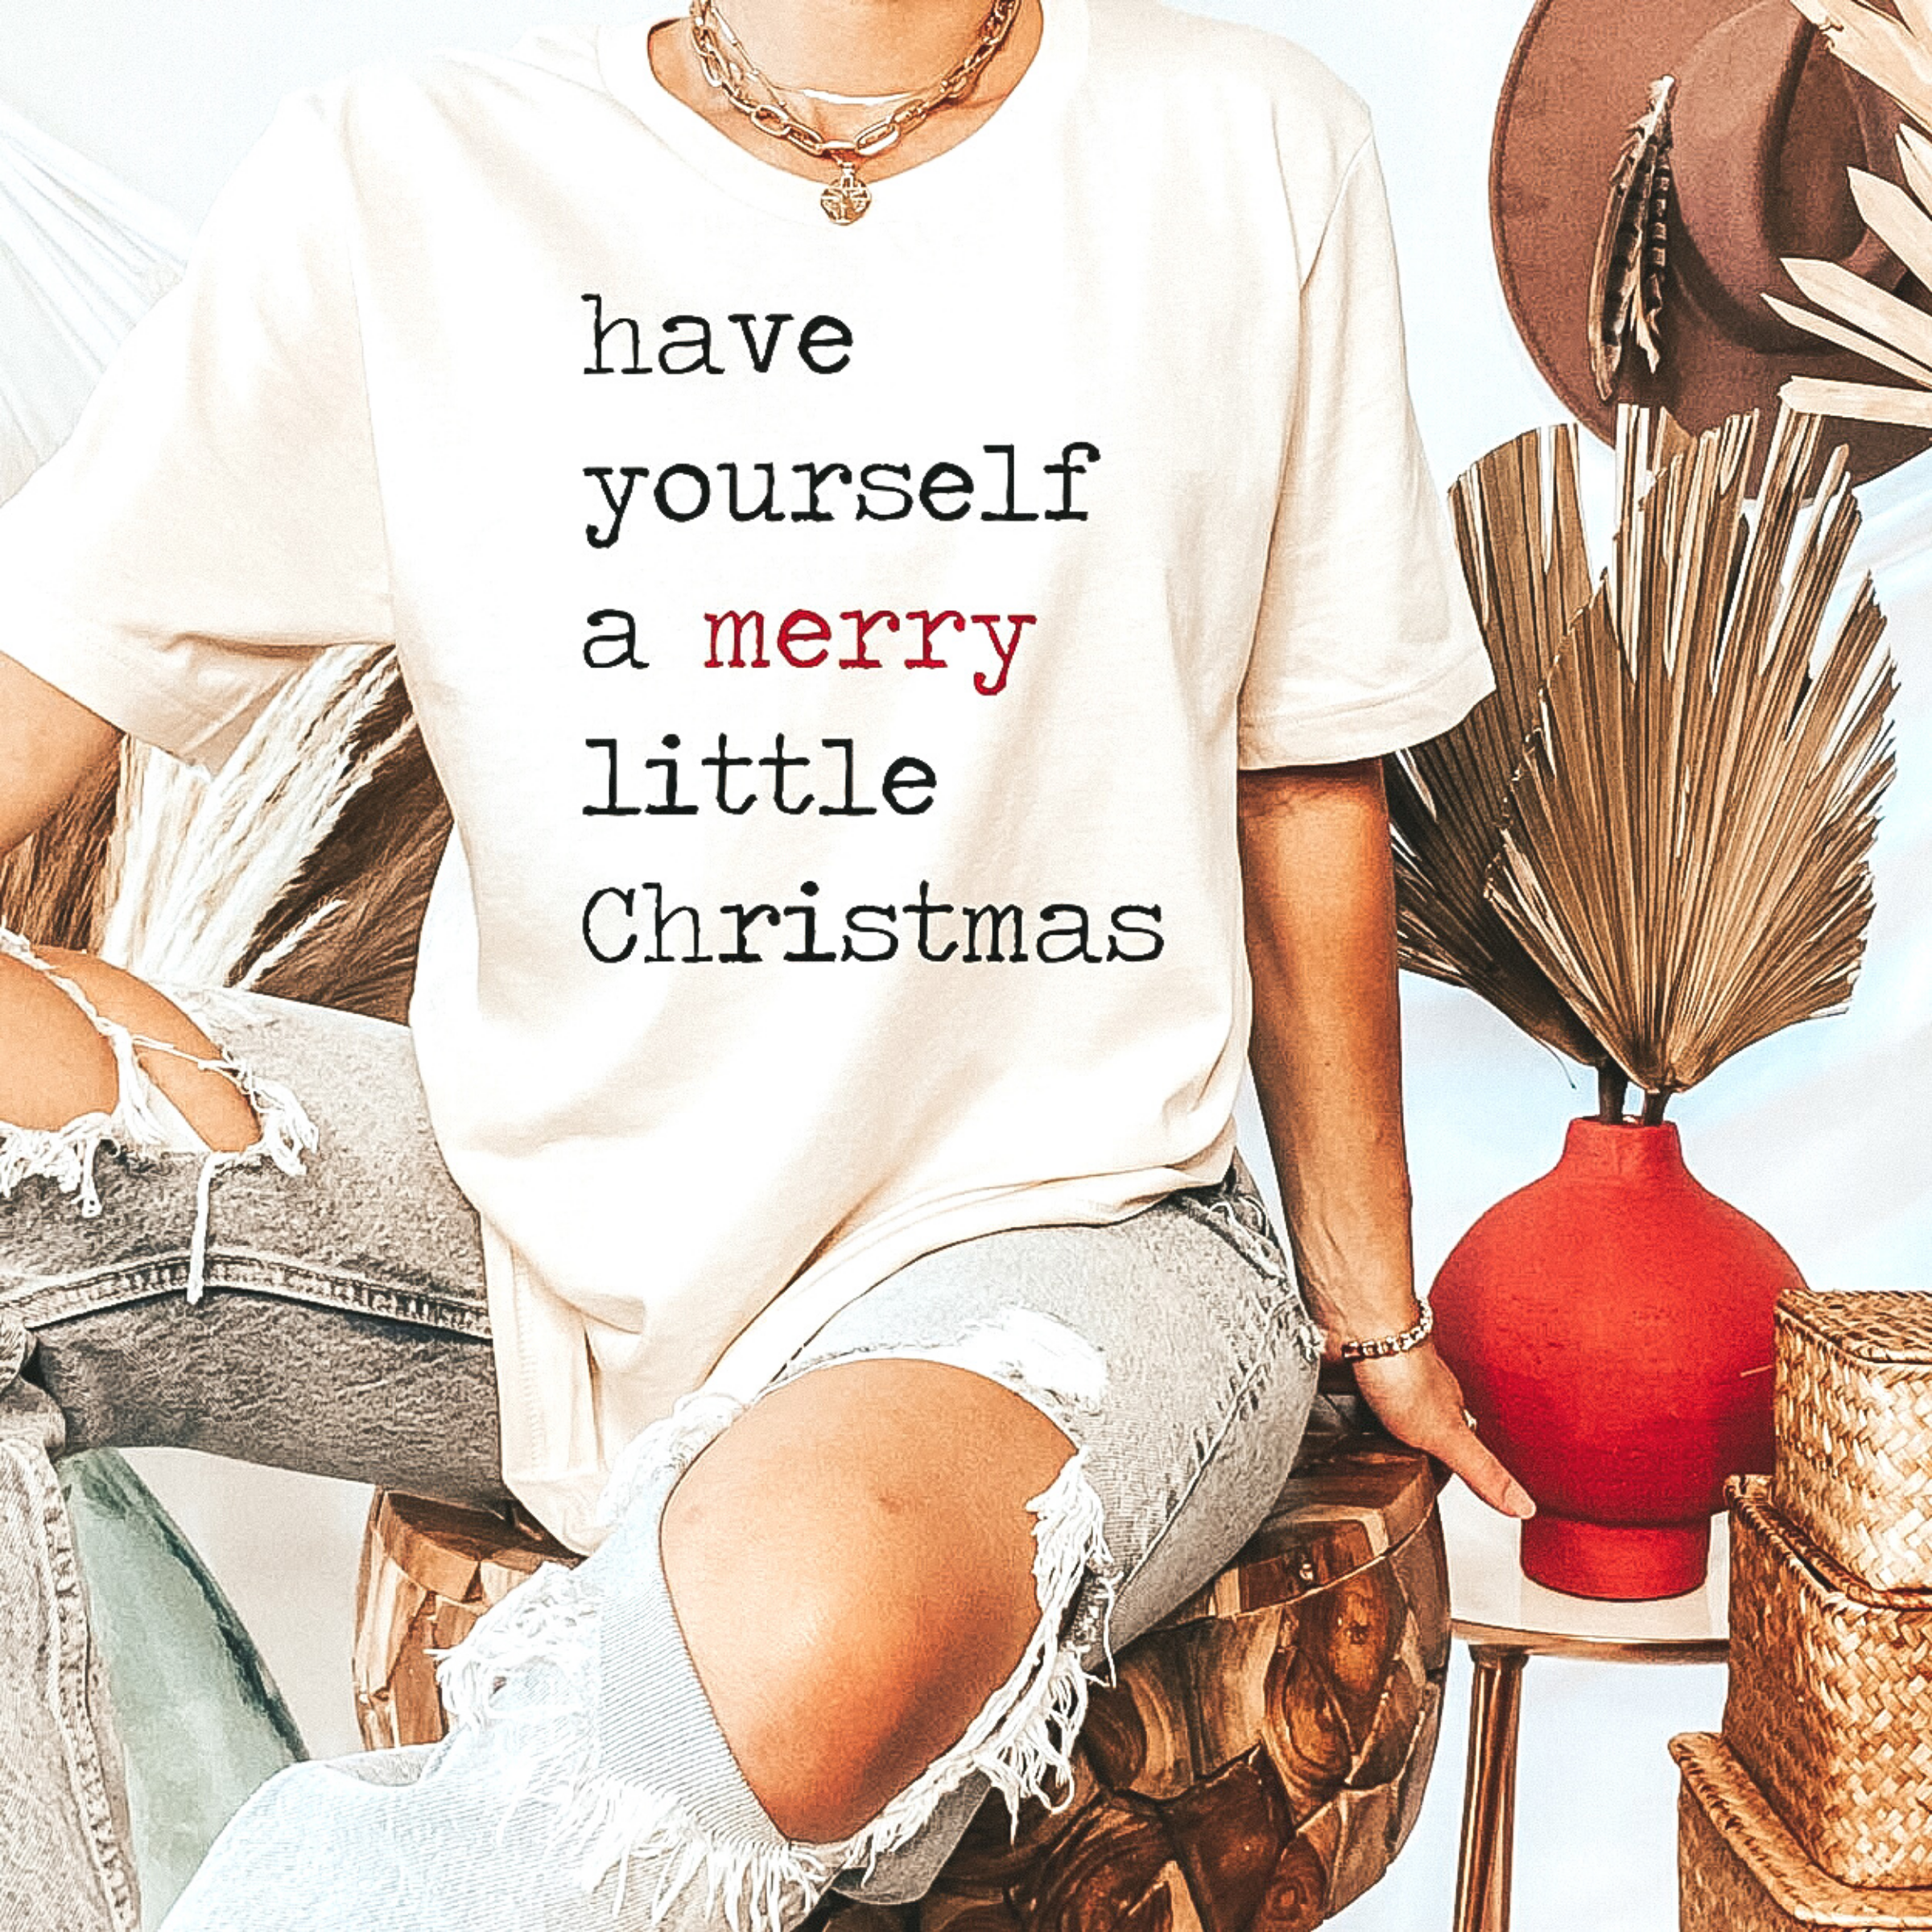 Model is wearing short sleeve, crew neck graphic tee that says "Have Yourself a Merry Little Christmas" on an ivory background. Model has it paired with distressed light wash jeans and gold jewelry.